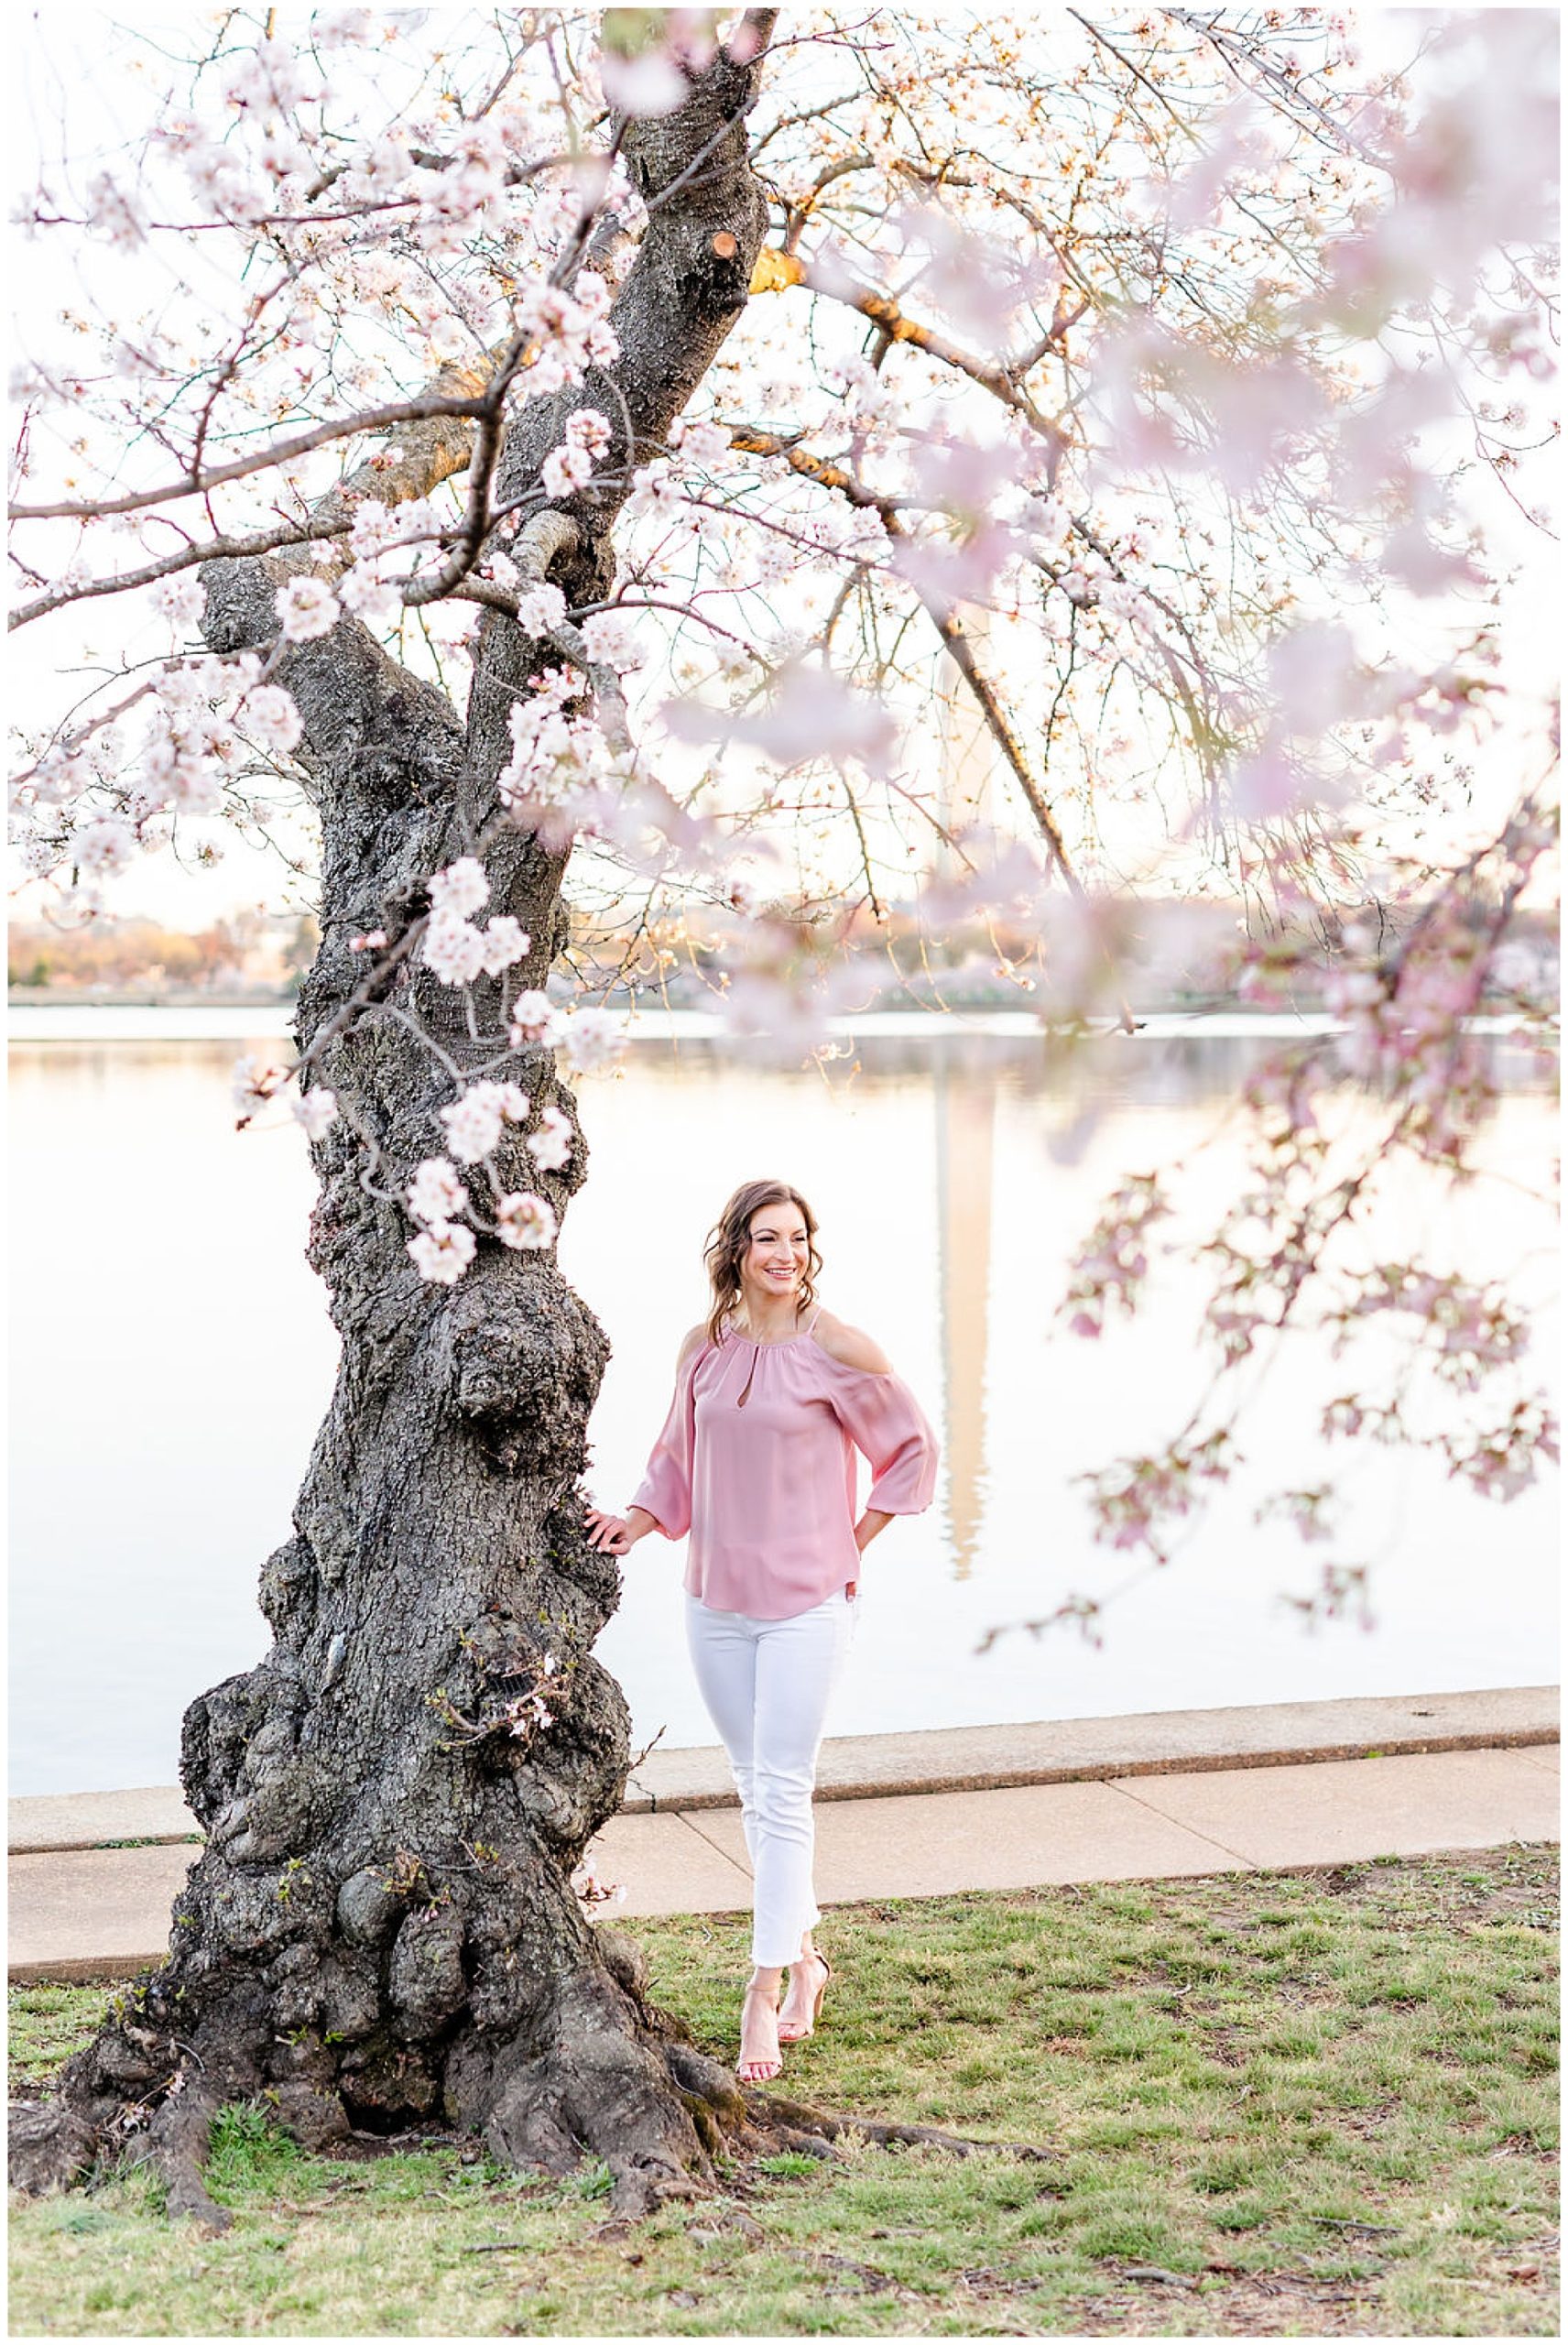 D.C. cherry blossoms headshots, cherry blossoms brand photos, DC peak bloom cherry blossoms, DC cherry blossoms photography, DC cherry blossoms photographer, DC cherry blossoms season, Rachel E.H. Photography, female headshots, woman looking into distance, woman with hand on tree, white pants